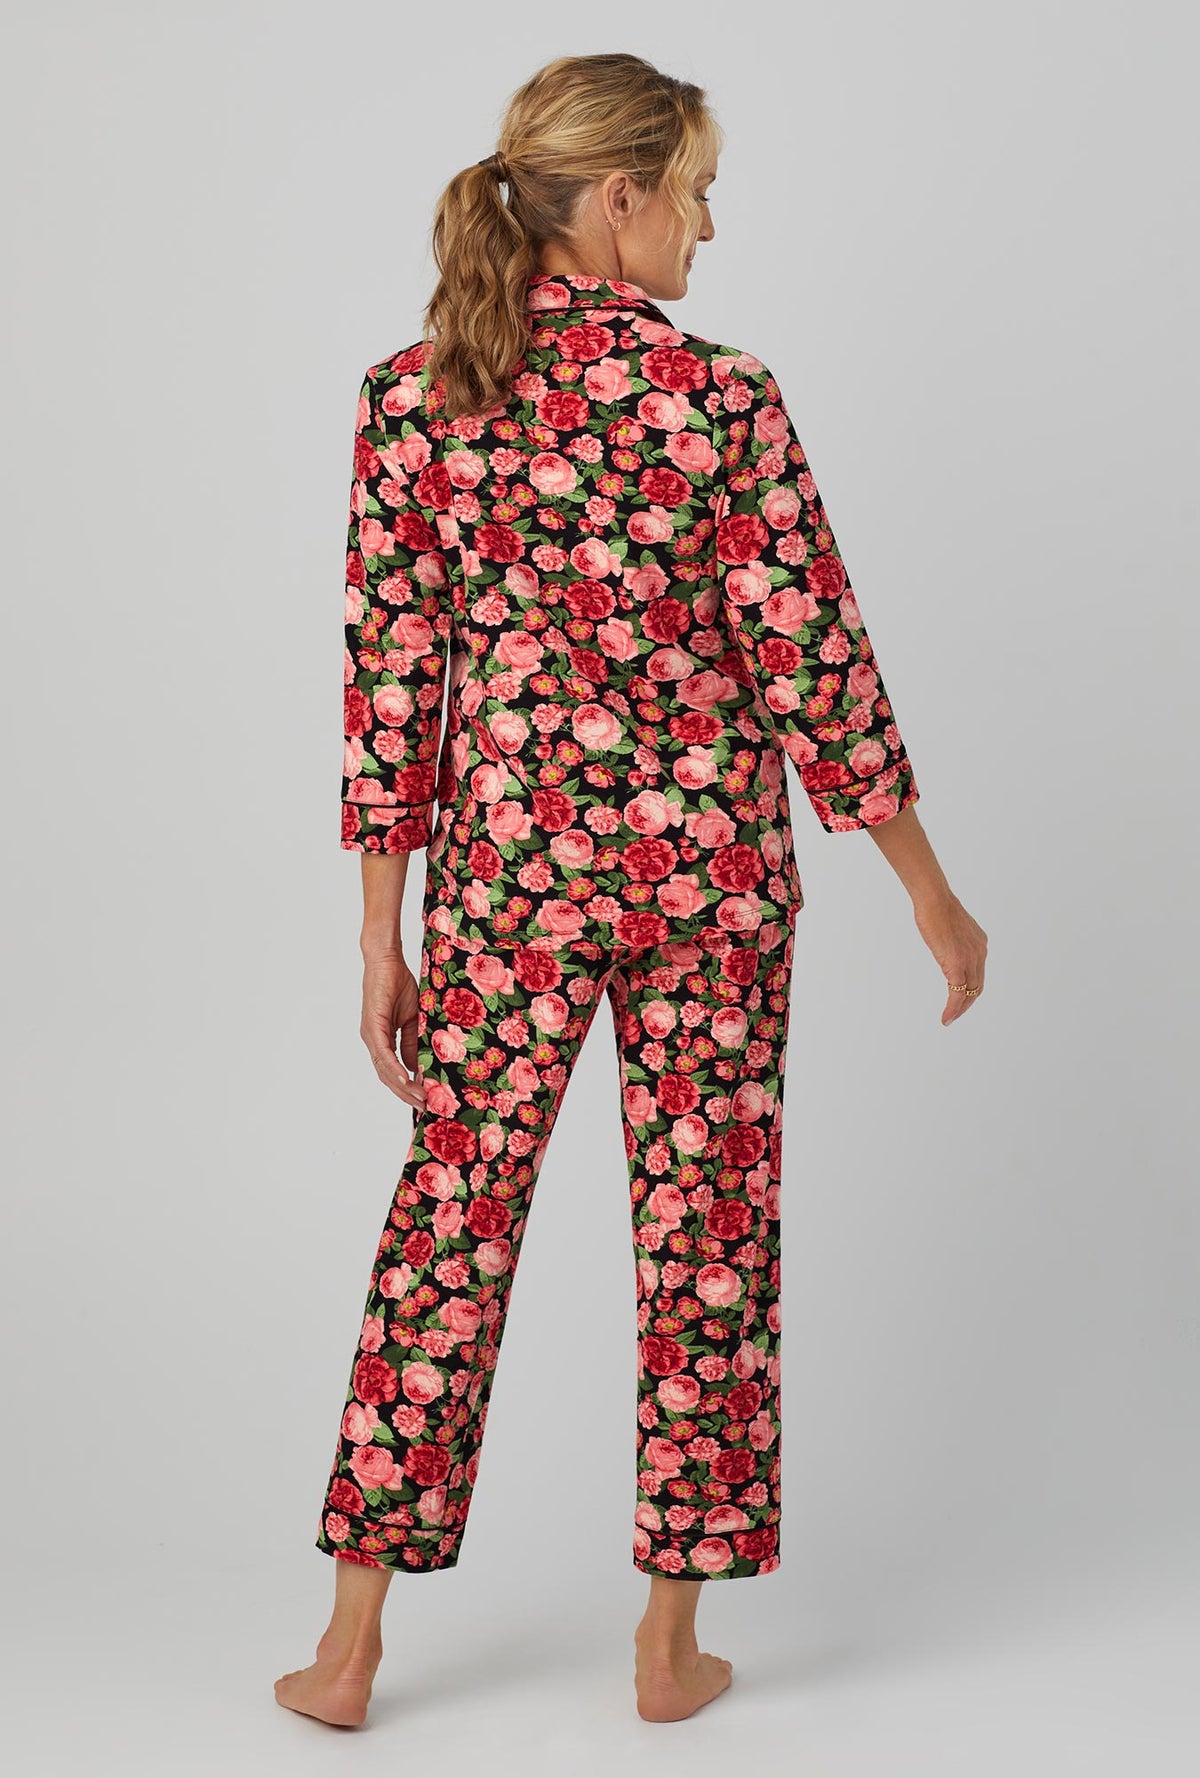 A lady wearing 3/4 Sleeve Classic Stretch Jersey Cropped PJ Set with Roses are Red print